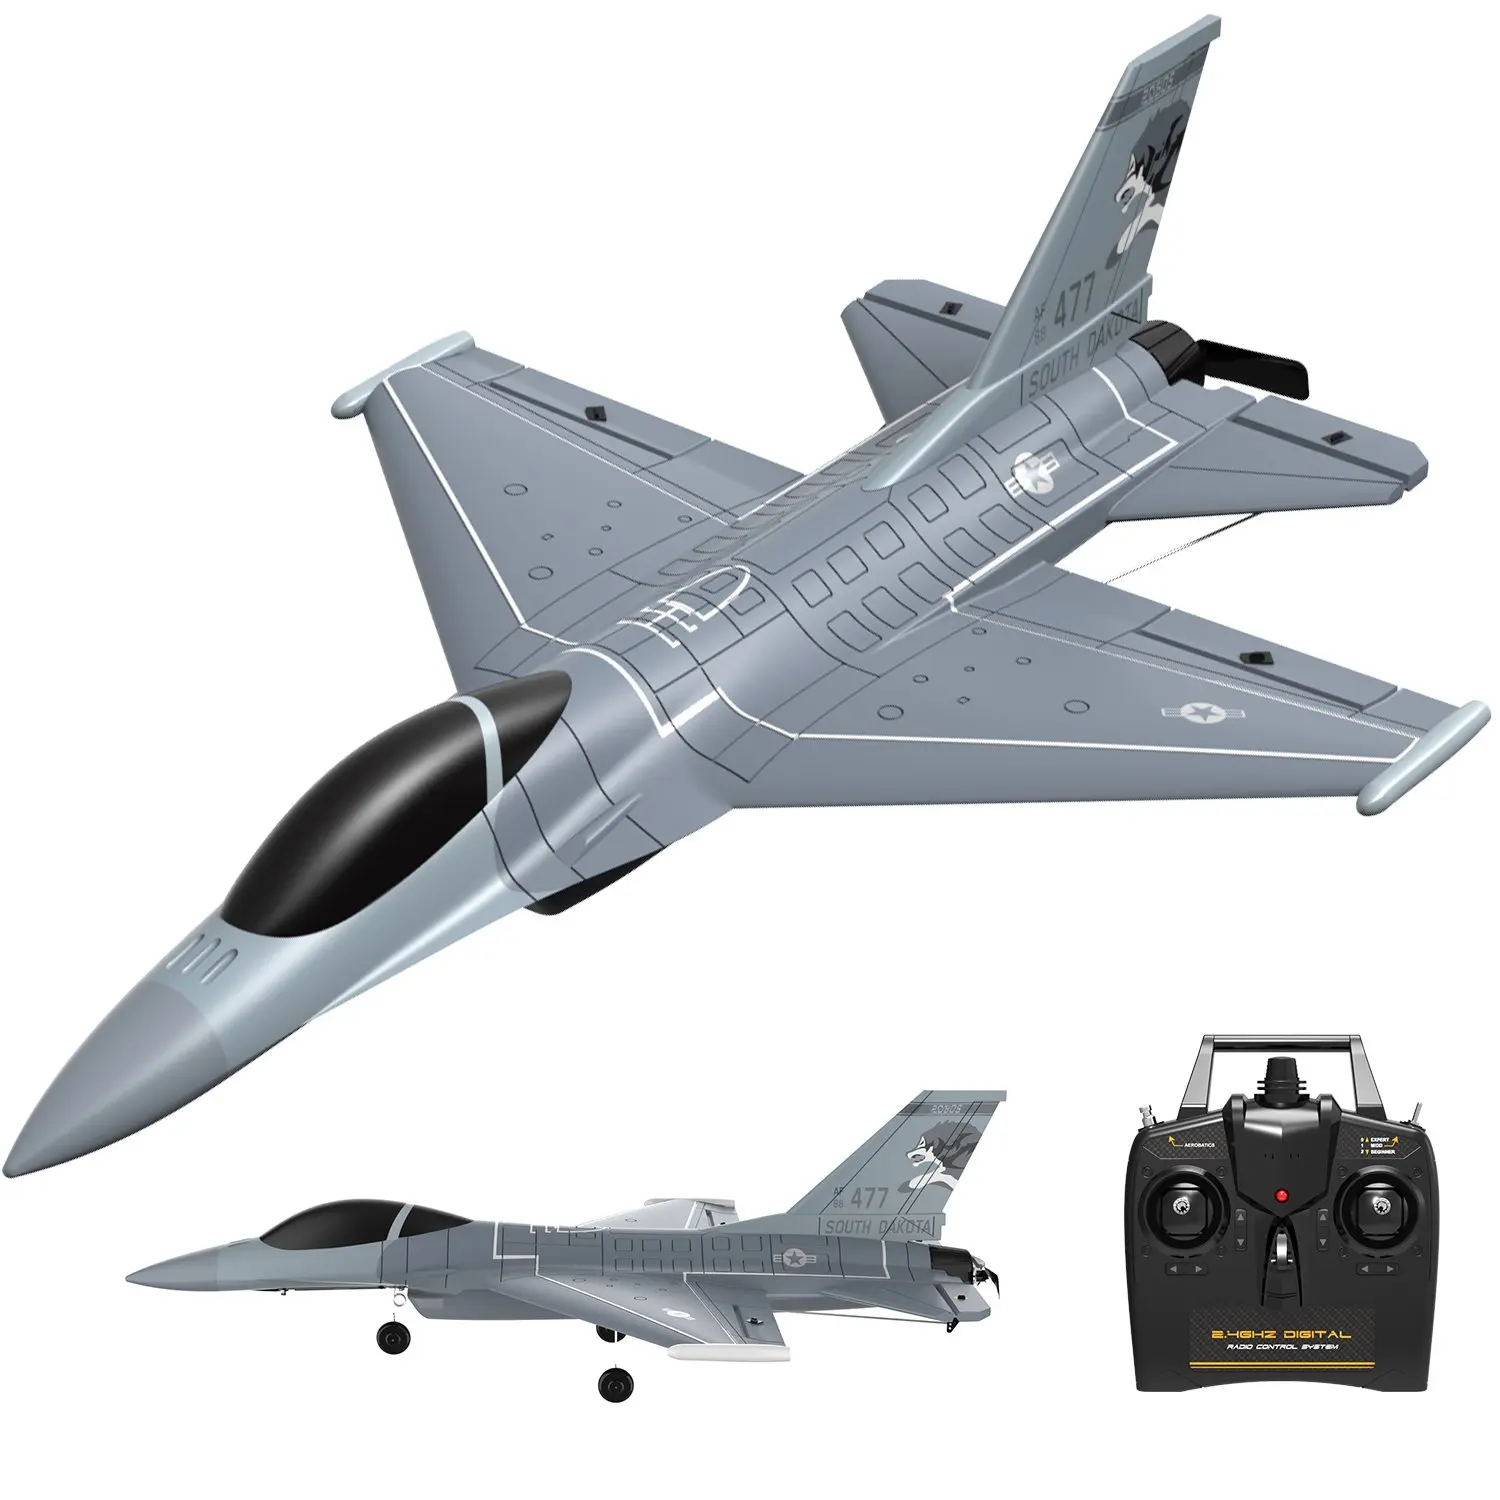 

VOLANTEXRC 4-CH Jet F-16 Fighting Falcon RTF with Xpilot Stabilizer, Perfect for Beginners (761-10)